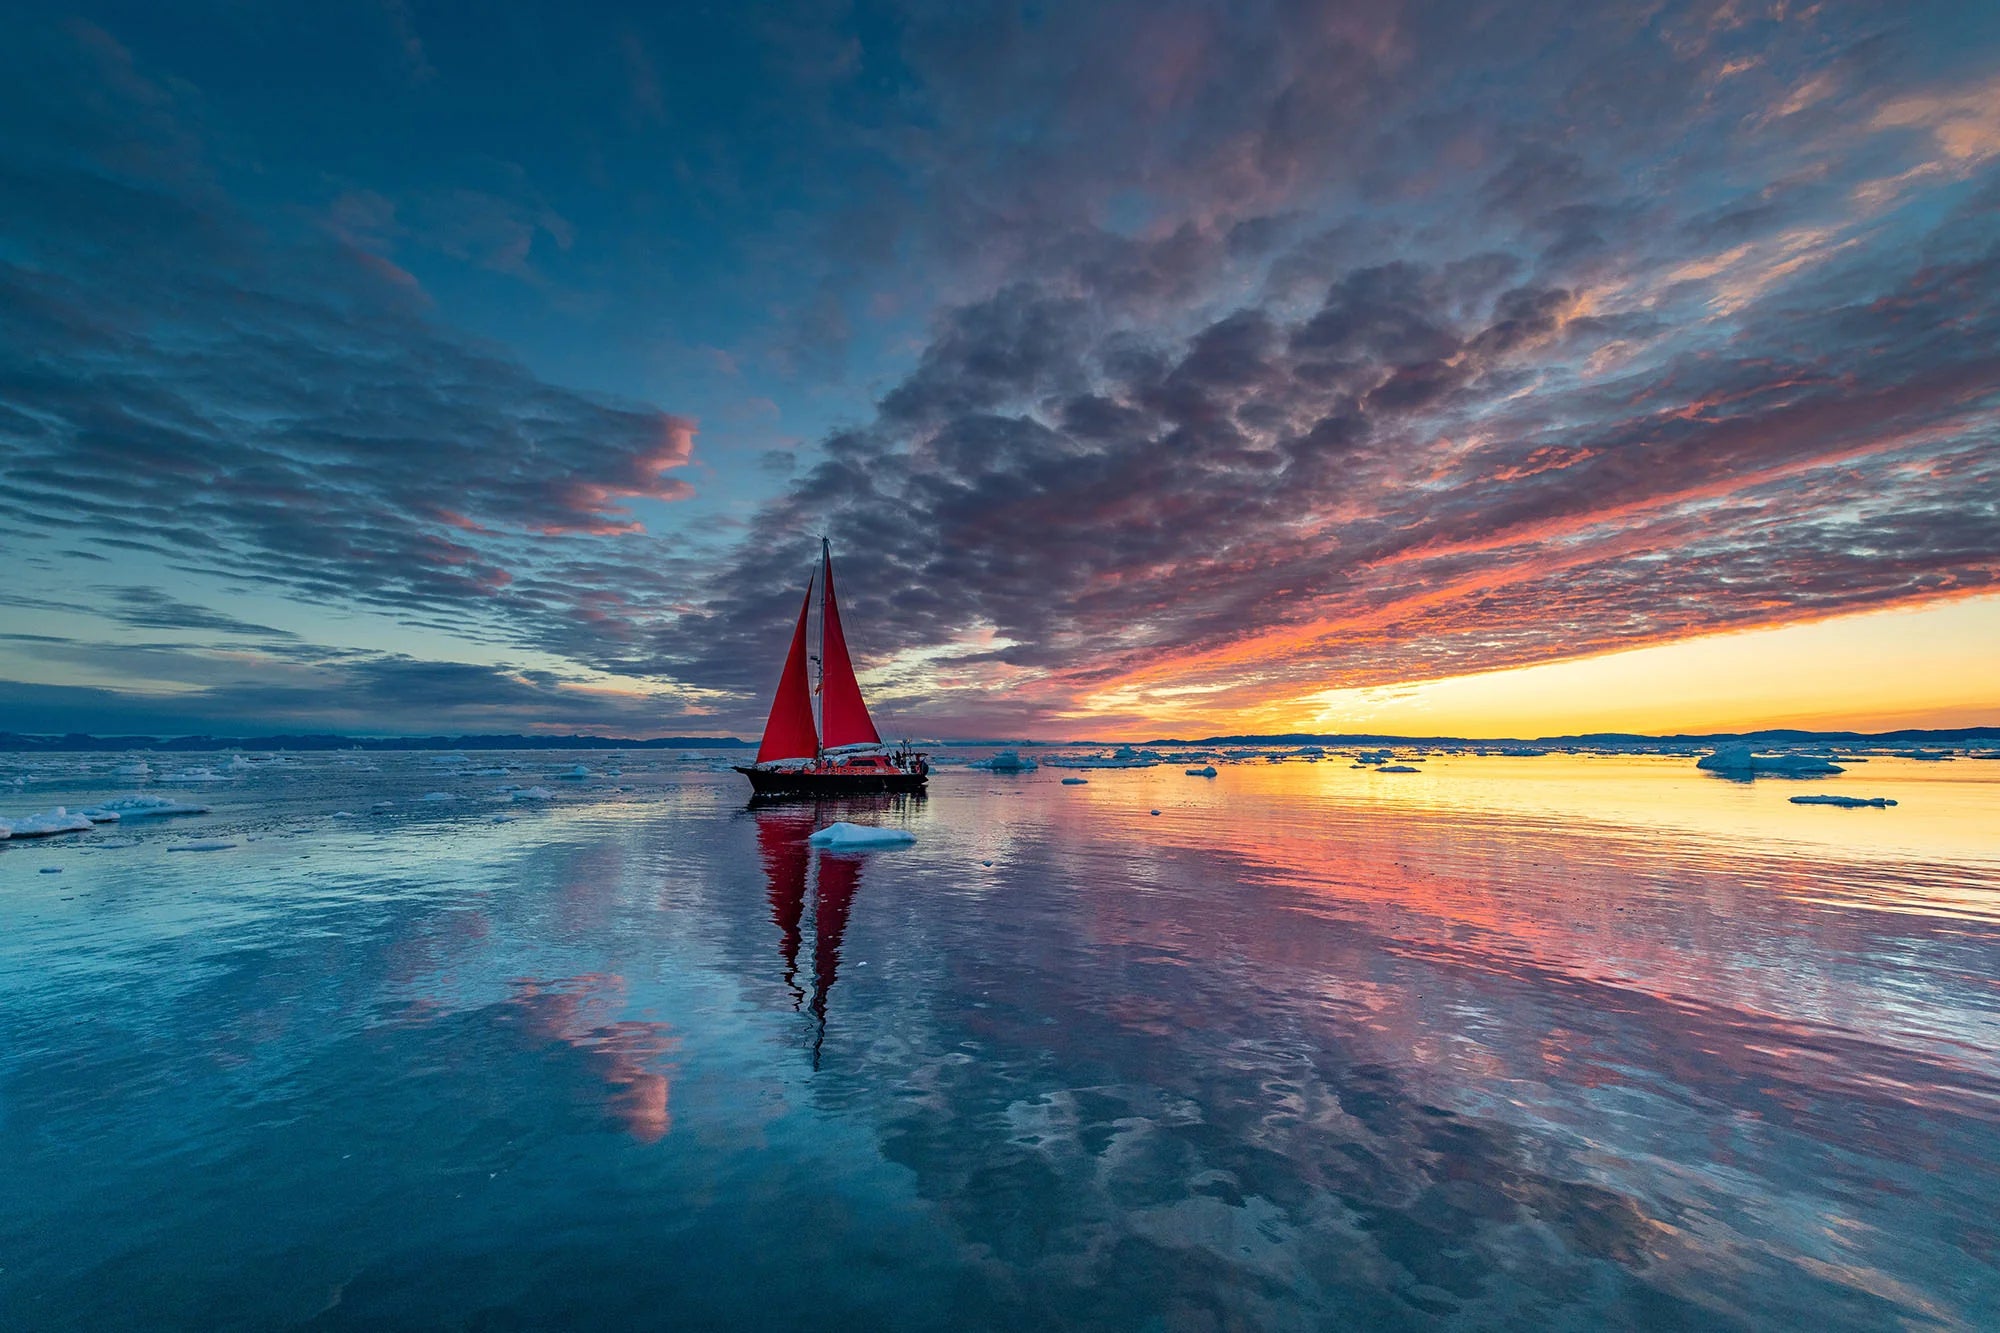 Sailboat on icy water at sunset